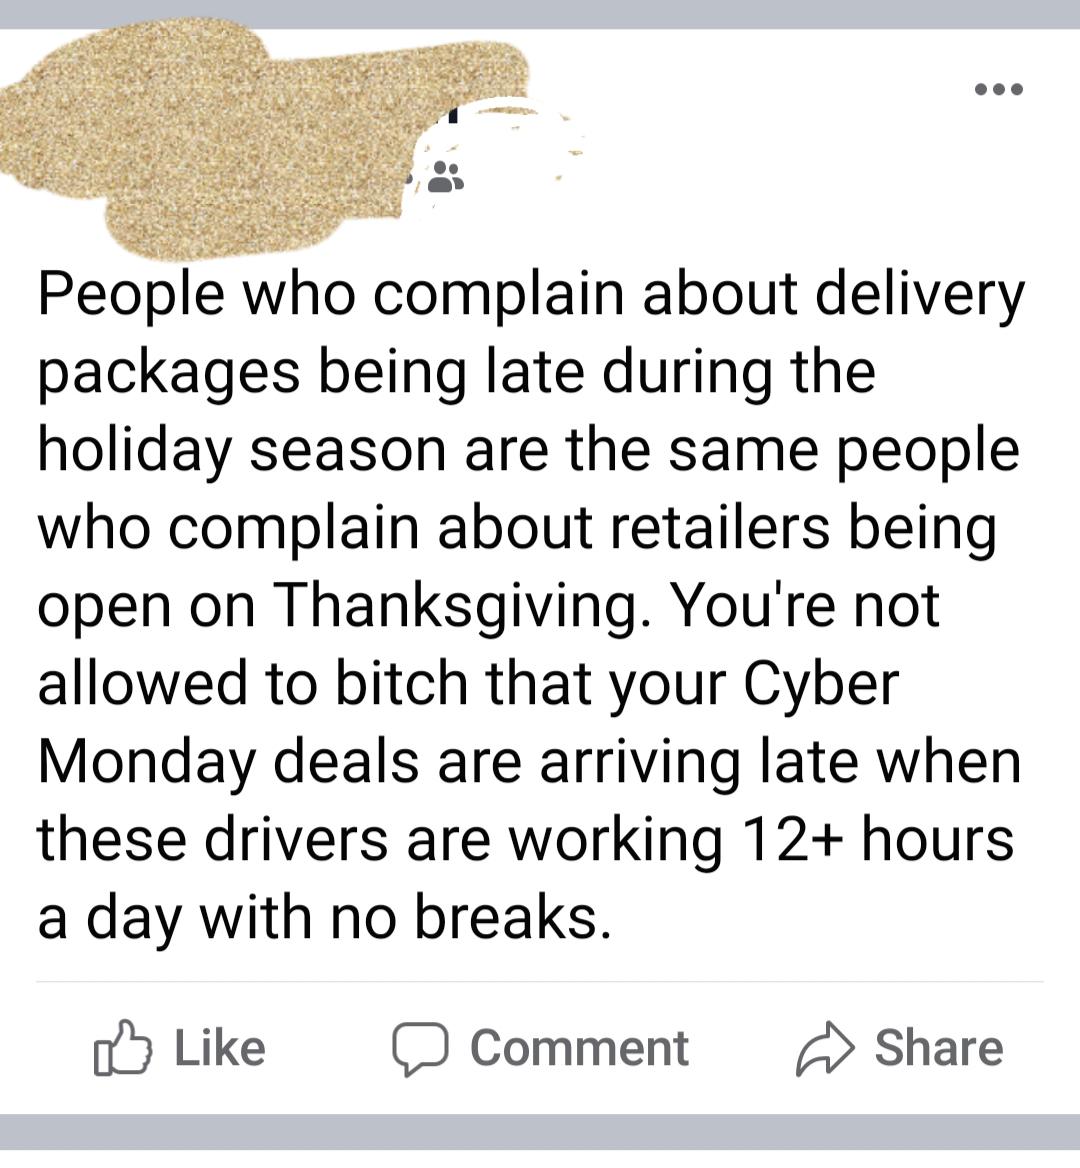 all i do is win - People who complain about delivery packages being late during the holiday season are the same people who complain about retailers being open on Thanksgiving. You're not allowed to bitch that your Cyber Monday deals are arriving late when